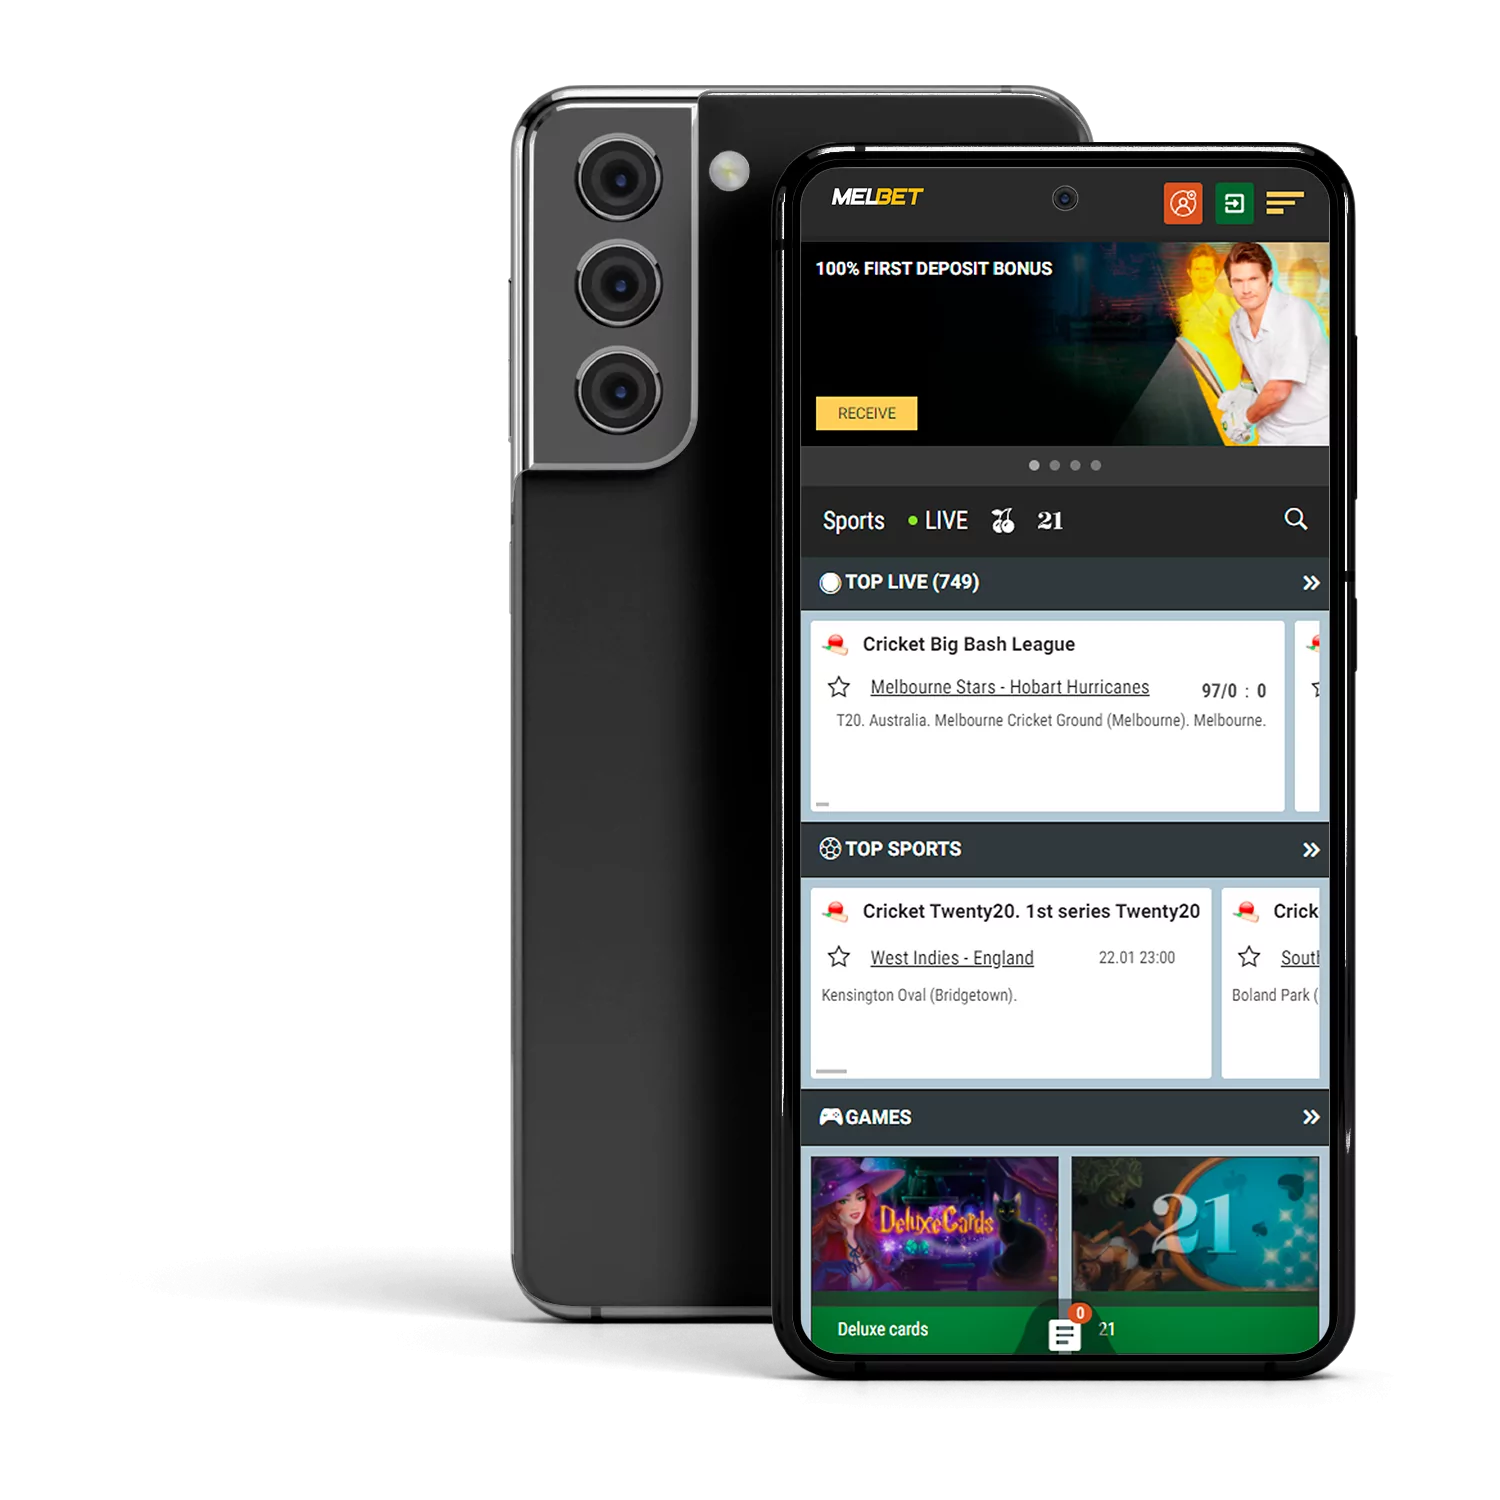 Learn about features of the Melbet app that you can use for online betting or playing casino games.